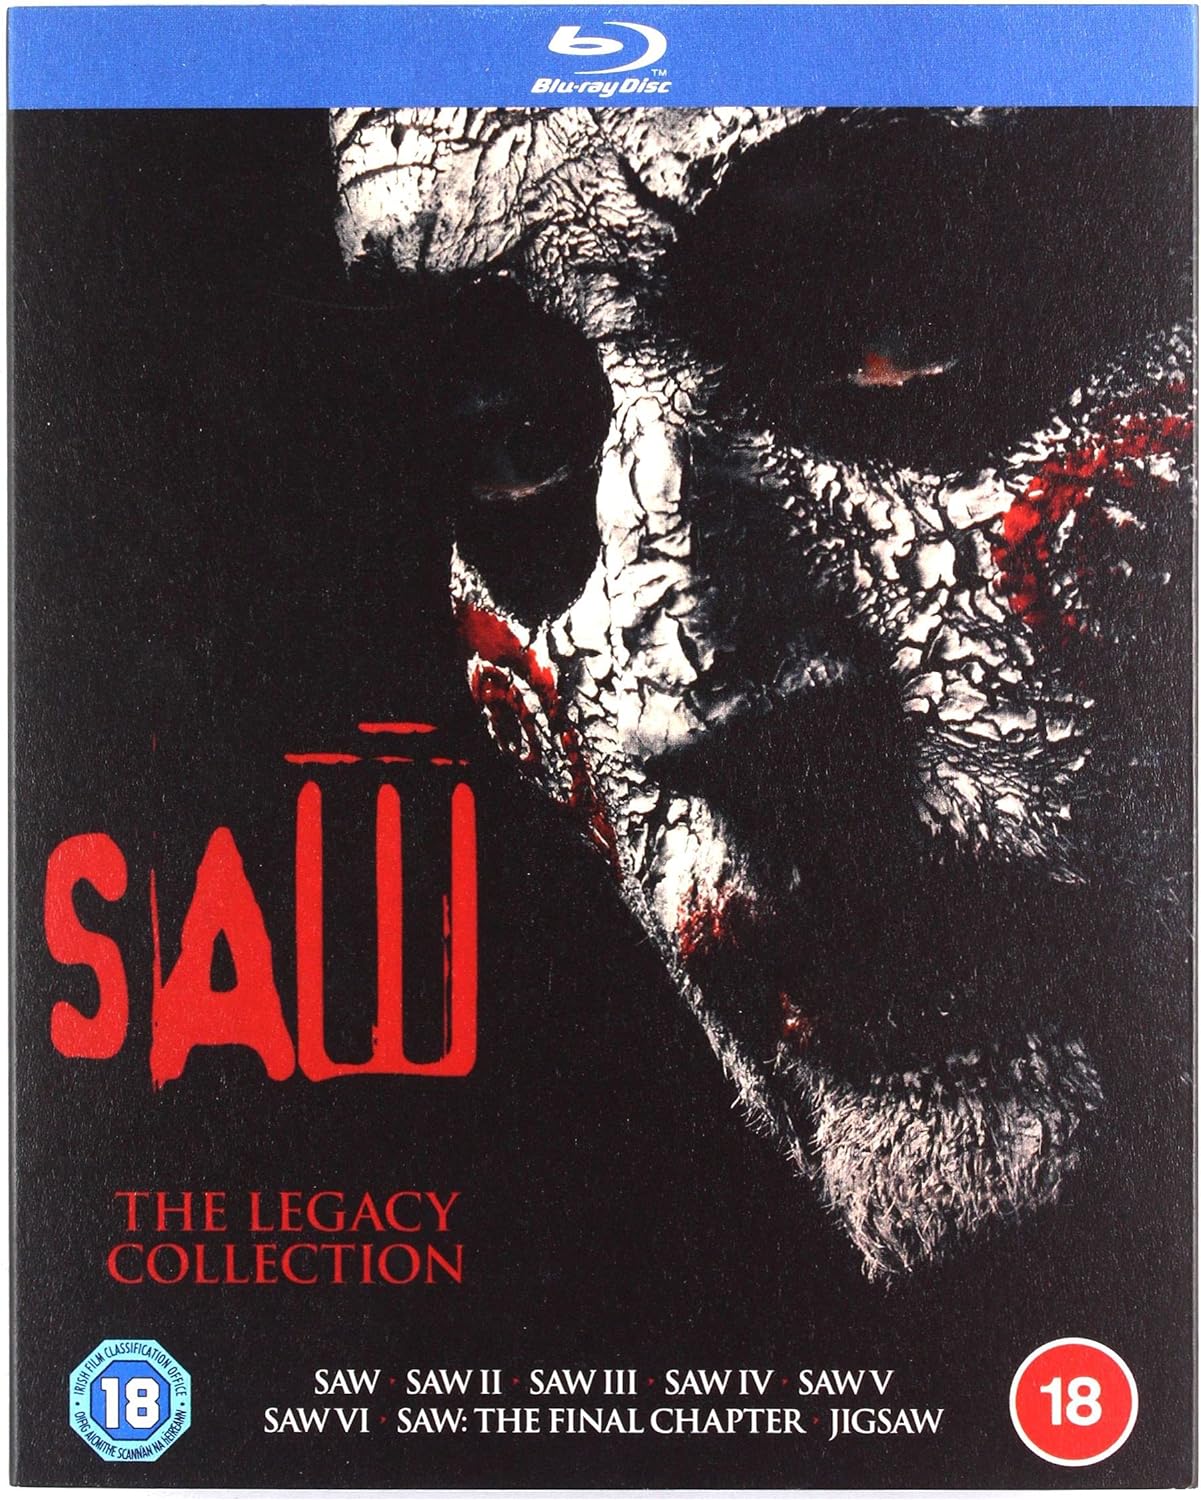 Saw: The Legacy Collection (8 Blu-ray)